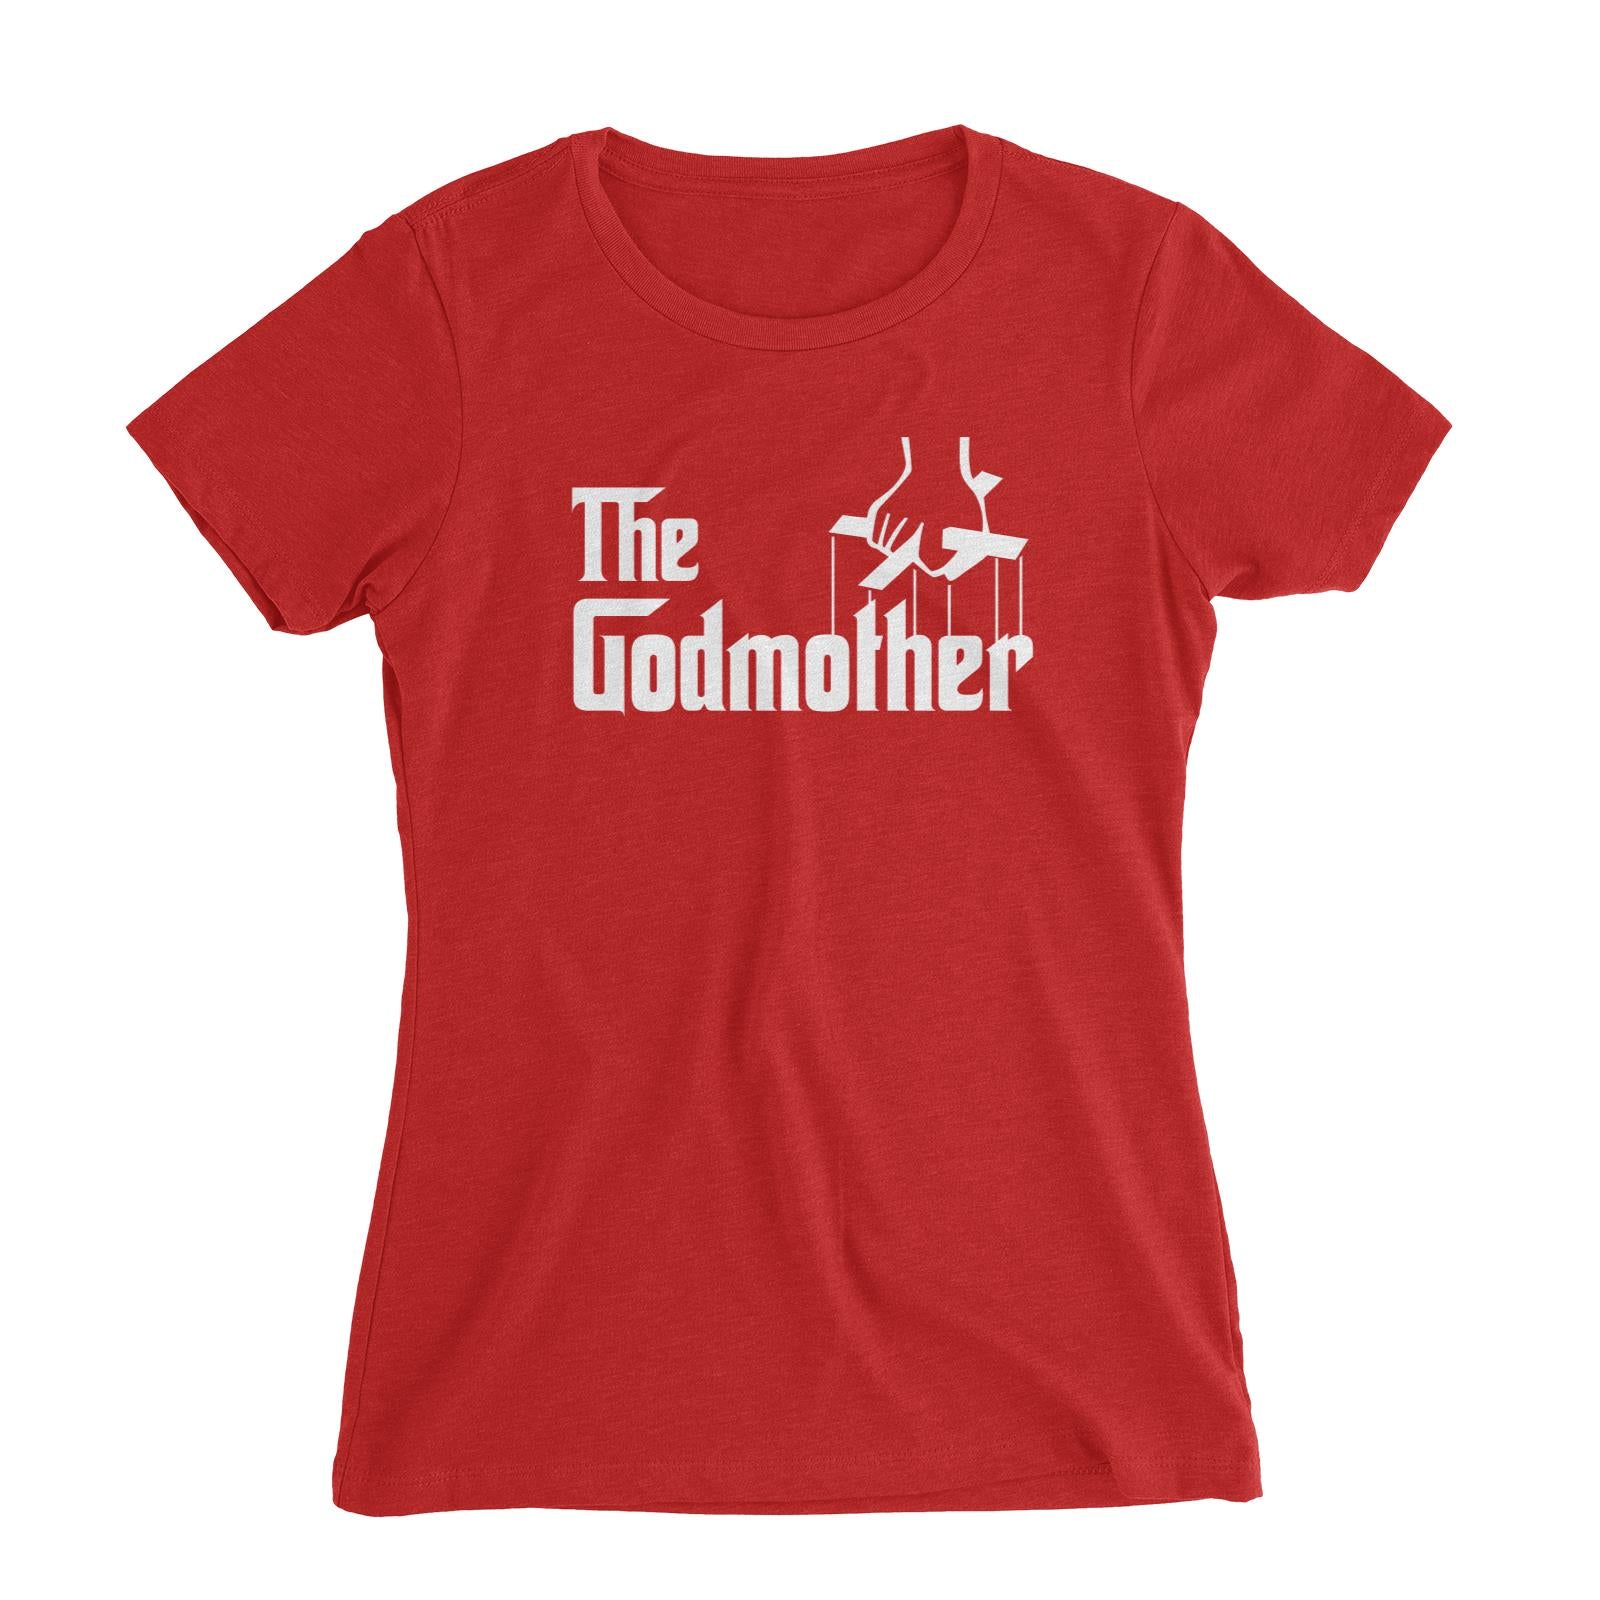 The Godmother Women's Slim Fit T-Shirt Godfather Matching Family